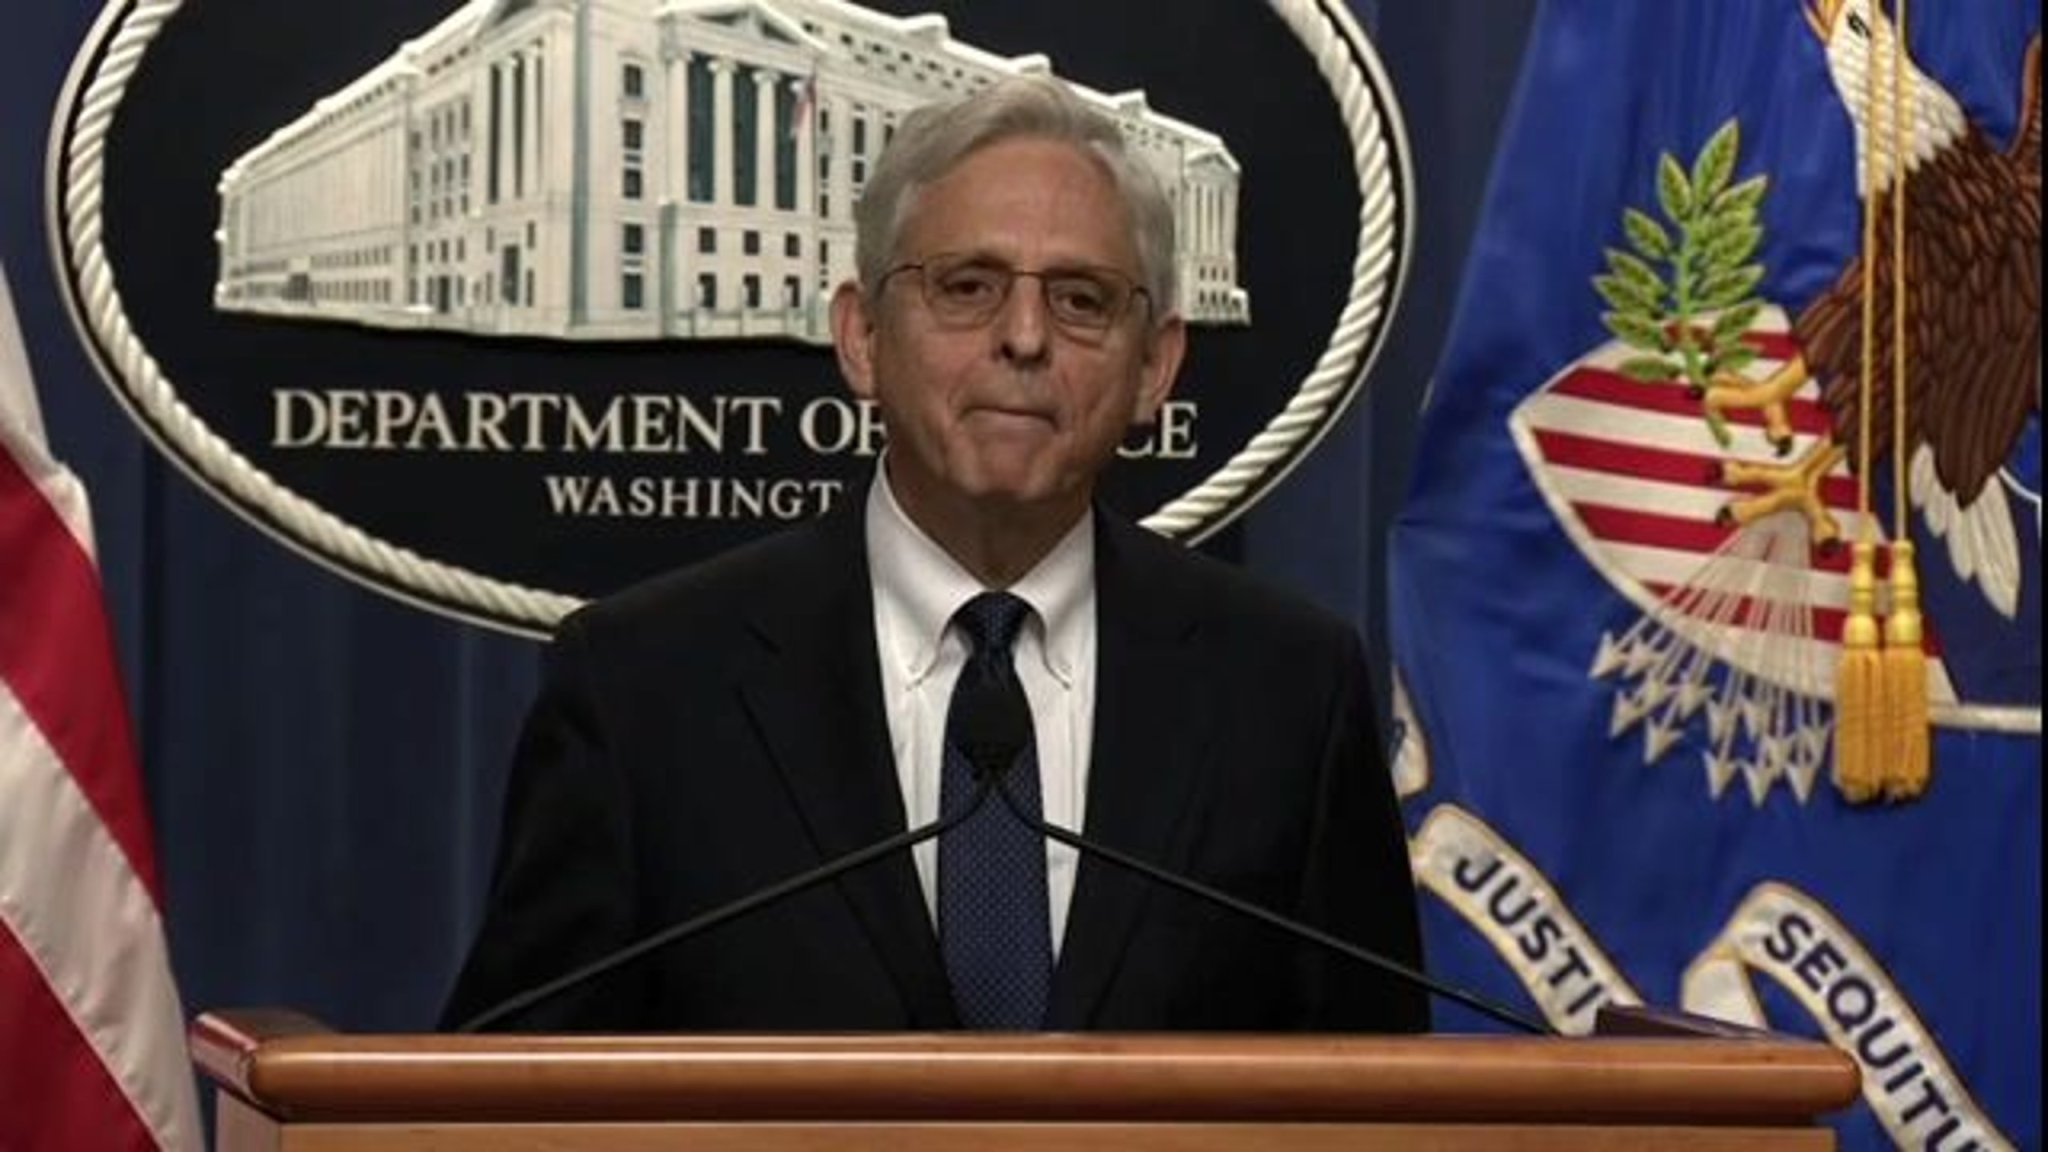 AG Garland: "The men and women of the FBI and the Justice Department are dedicated, patriotic public servants."